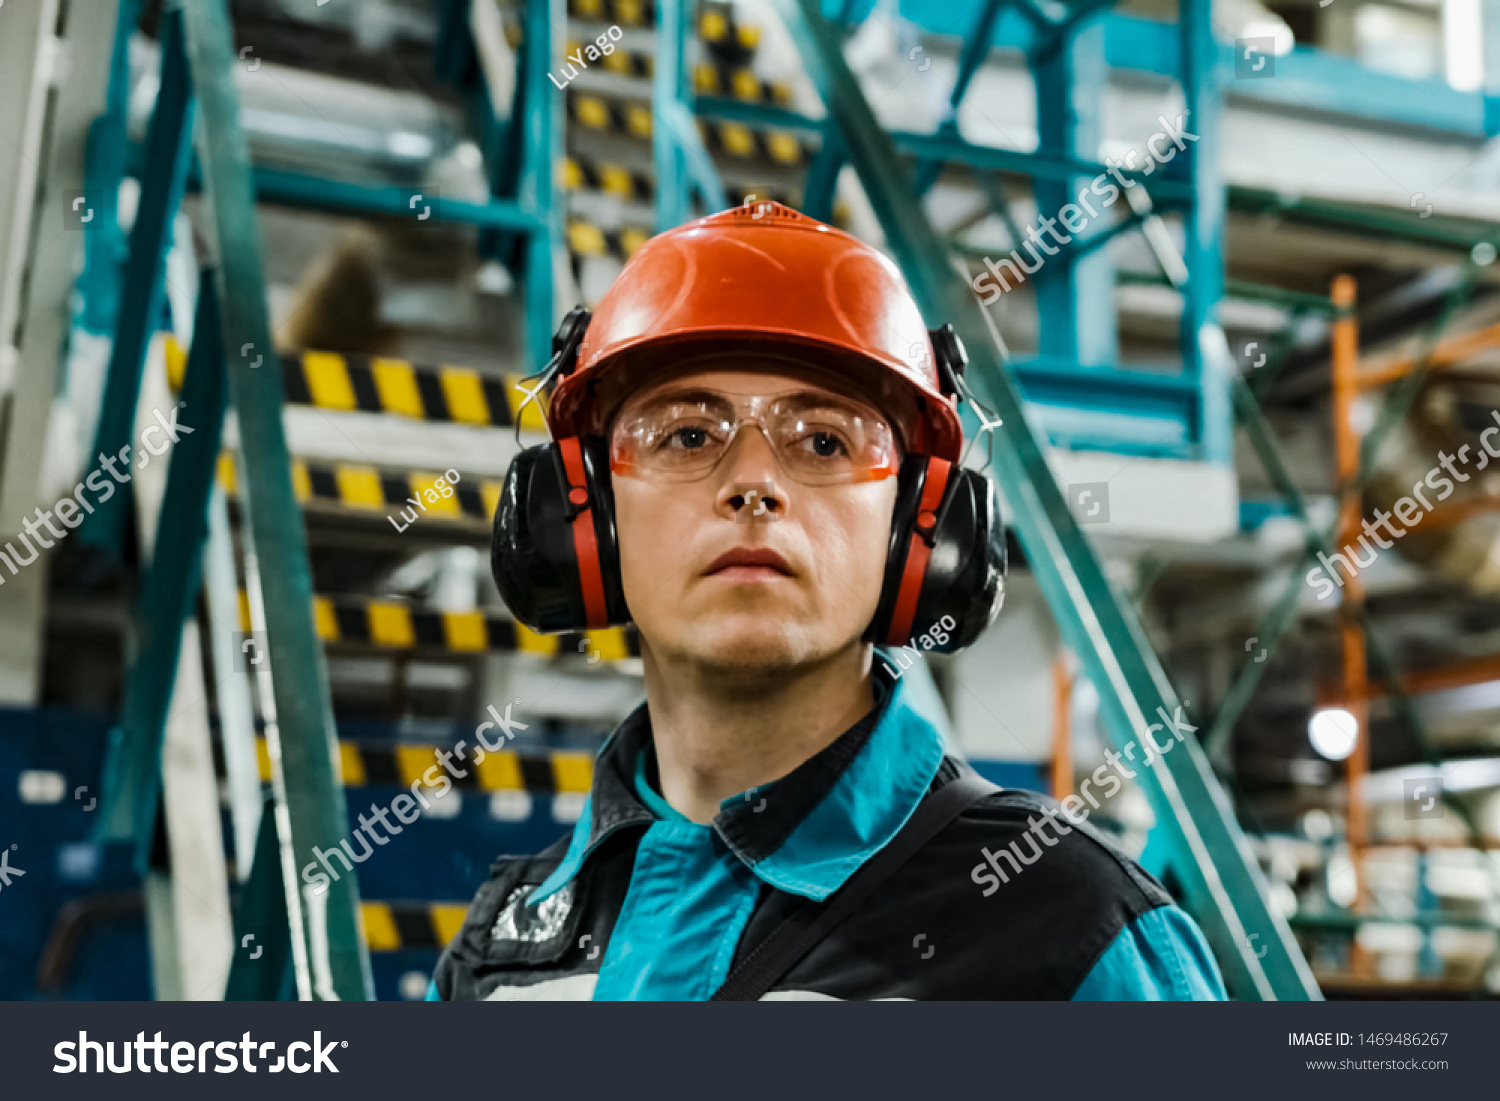 Tobolsk, Russia - June 19, 2019: A worker of an oil refinery in overalls and a helmet inspects equipment. #1469486267